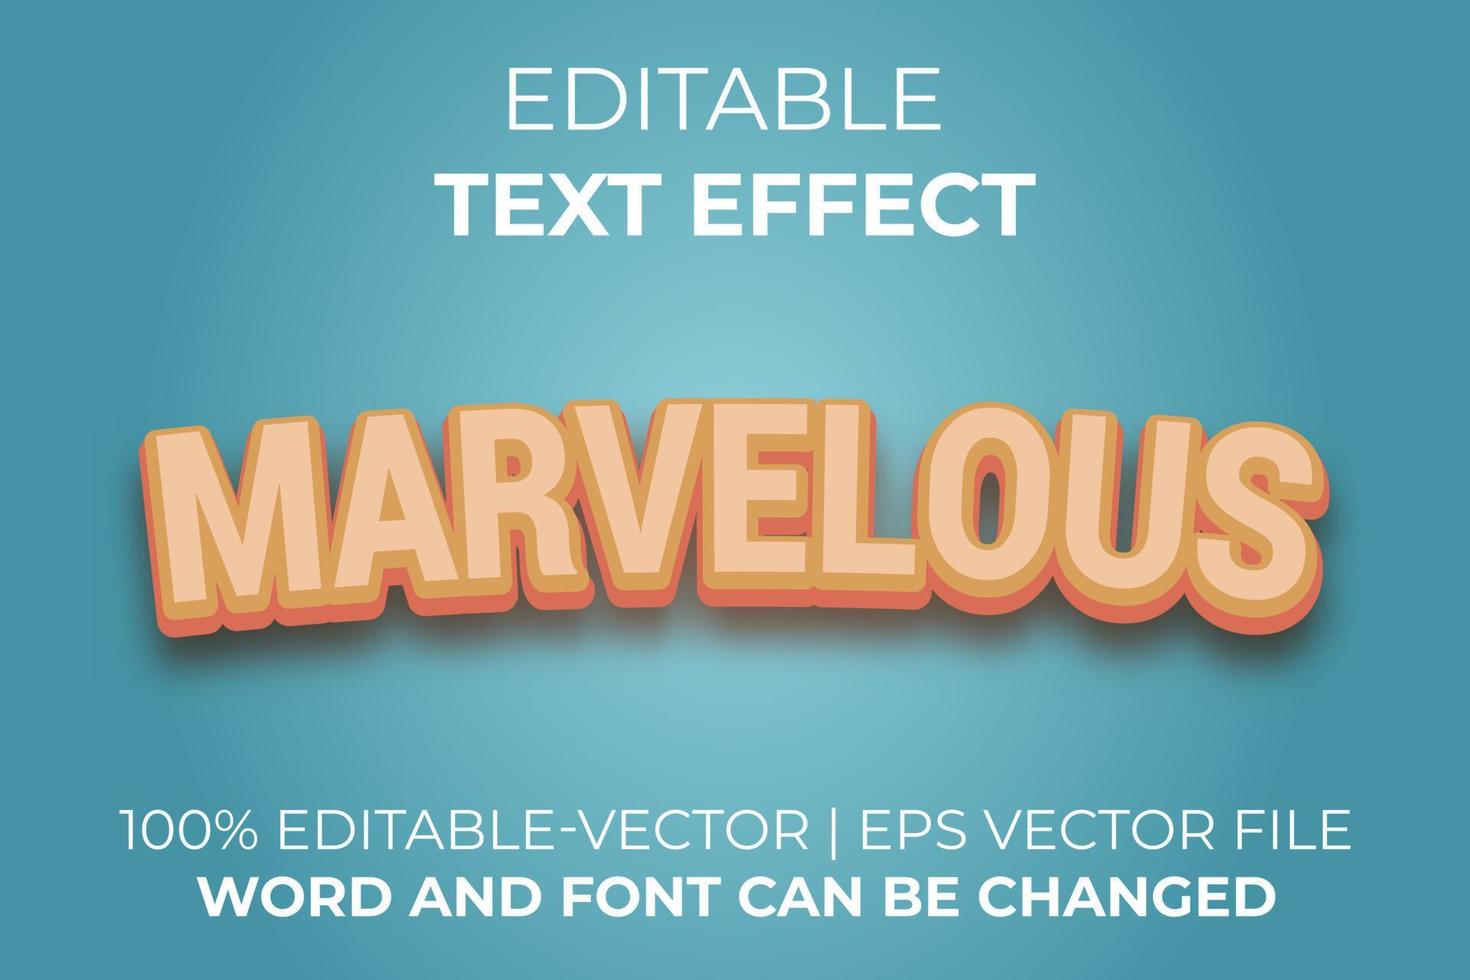 Marvelous text effect, easy to edit vector